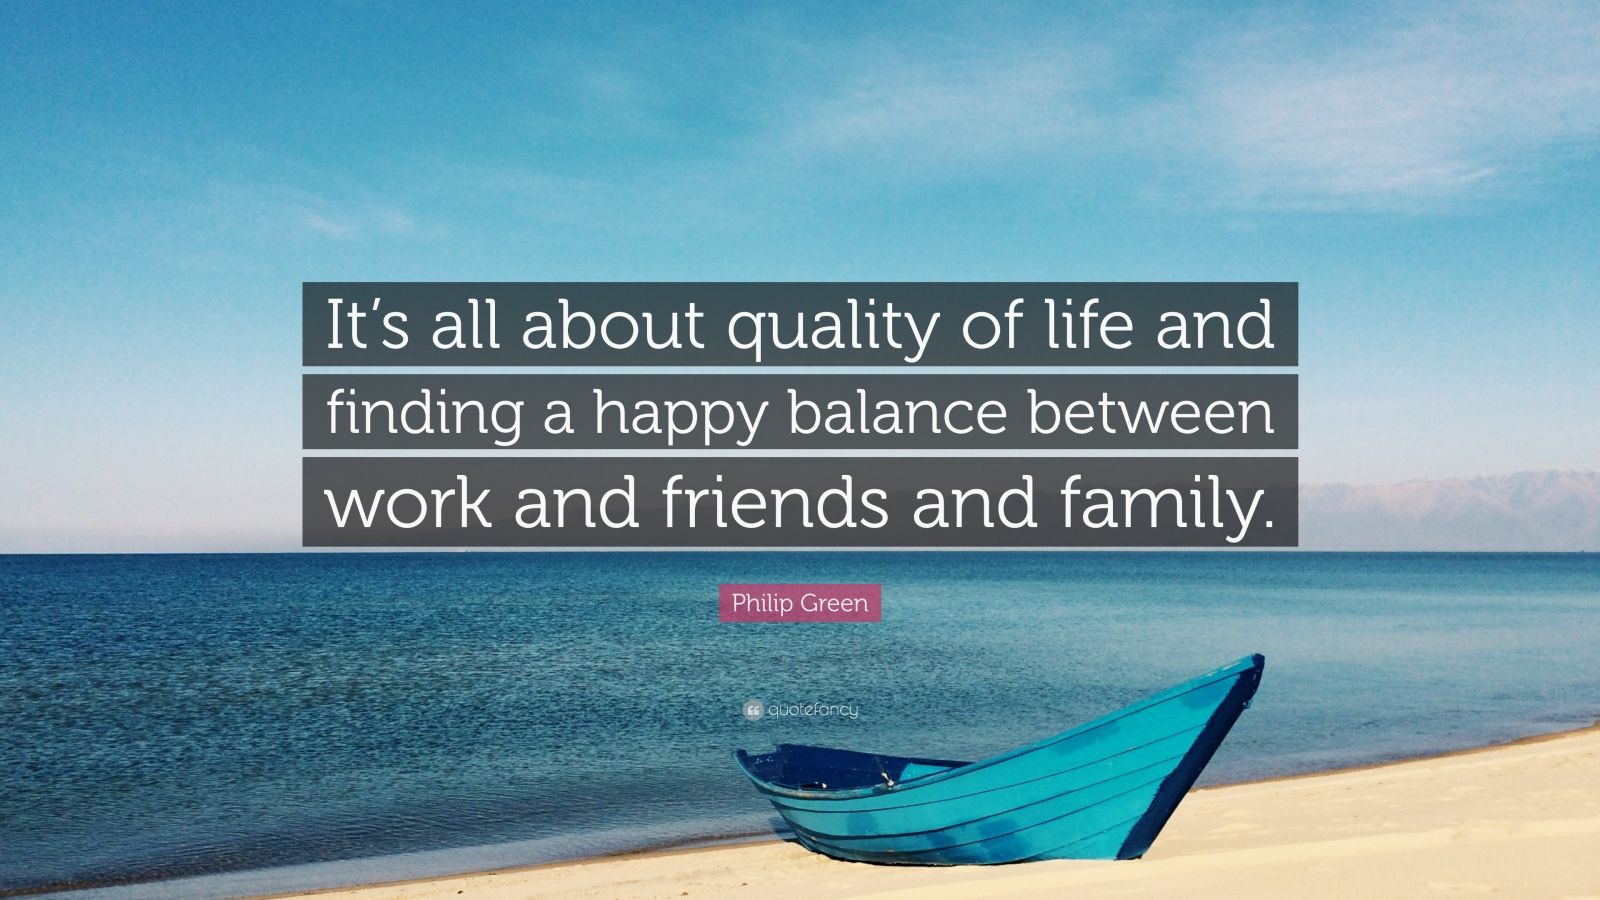 Philip Green Quote: “It’s all about quality of life and finding a happy